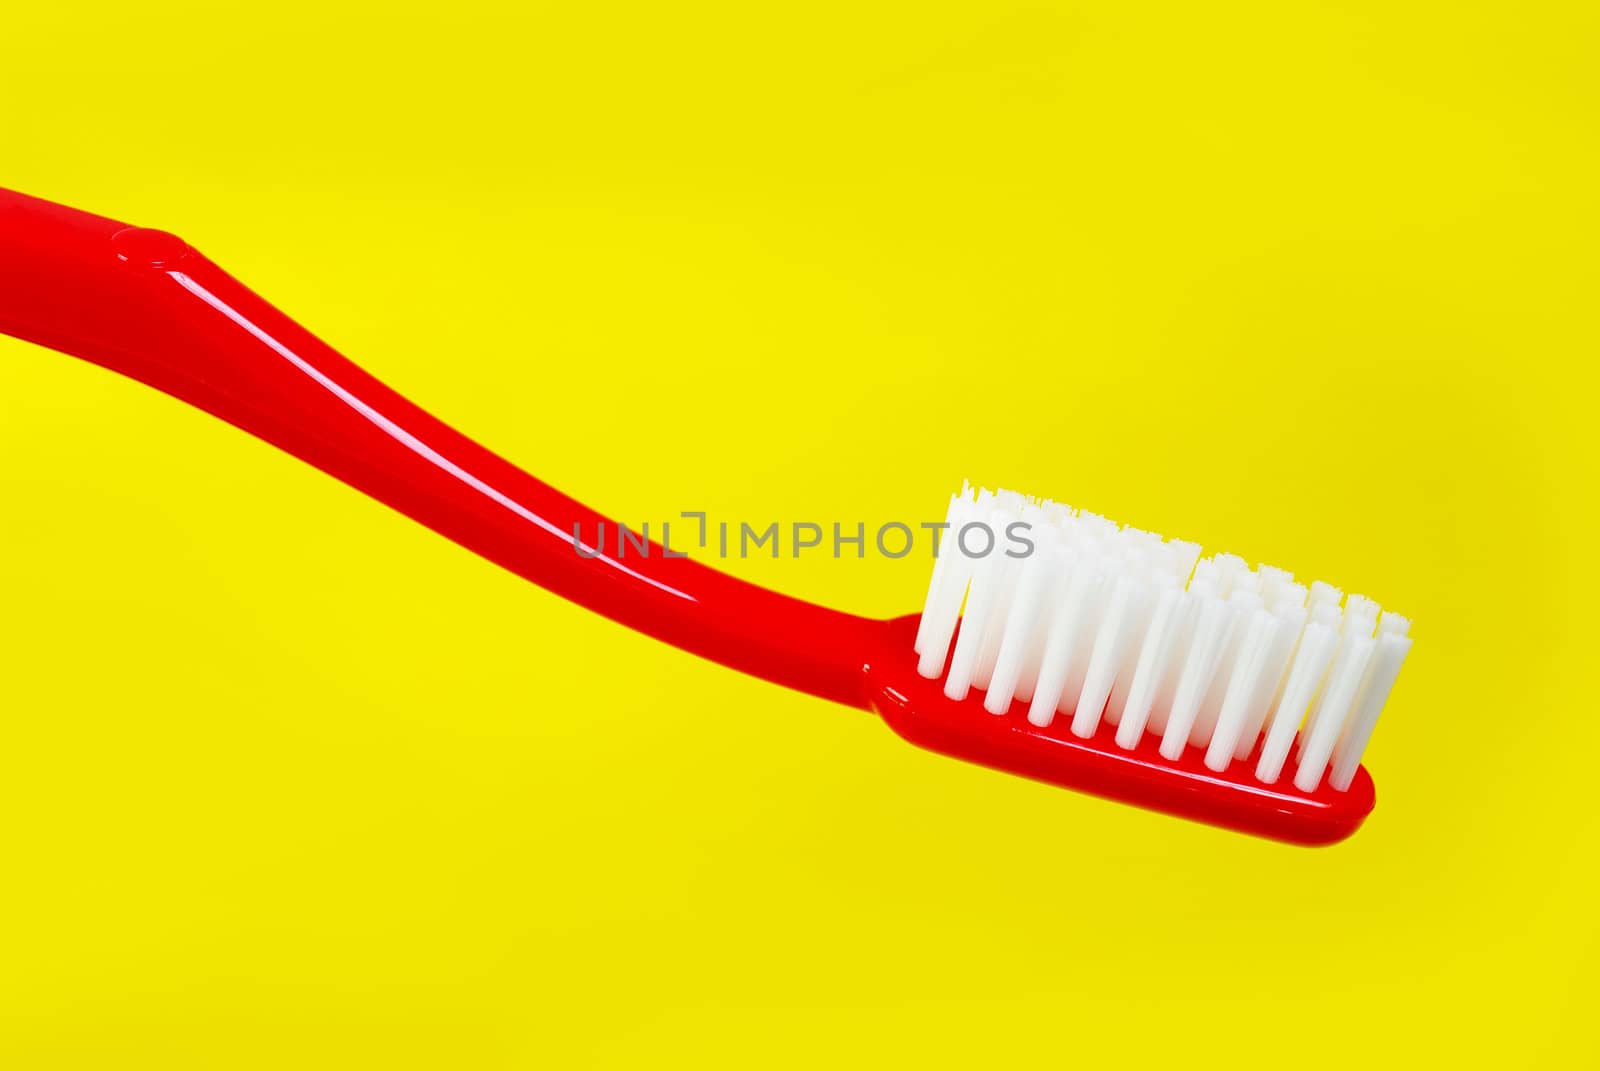 Red toothbrush on yellow background 